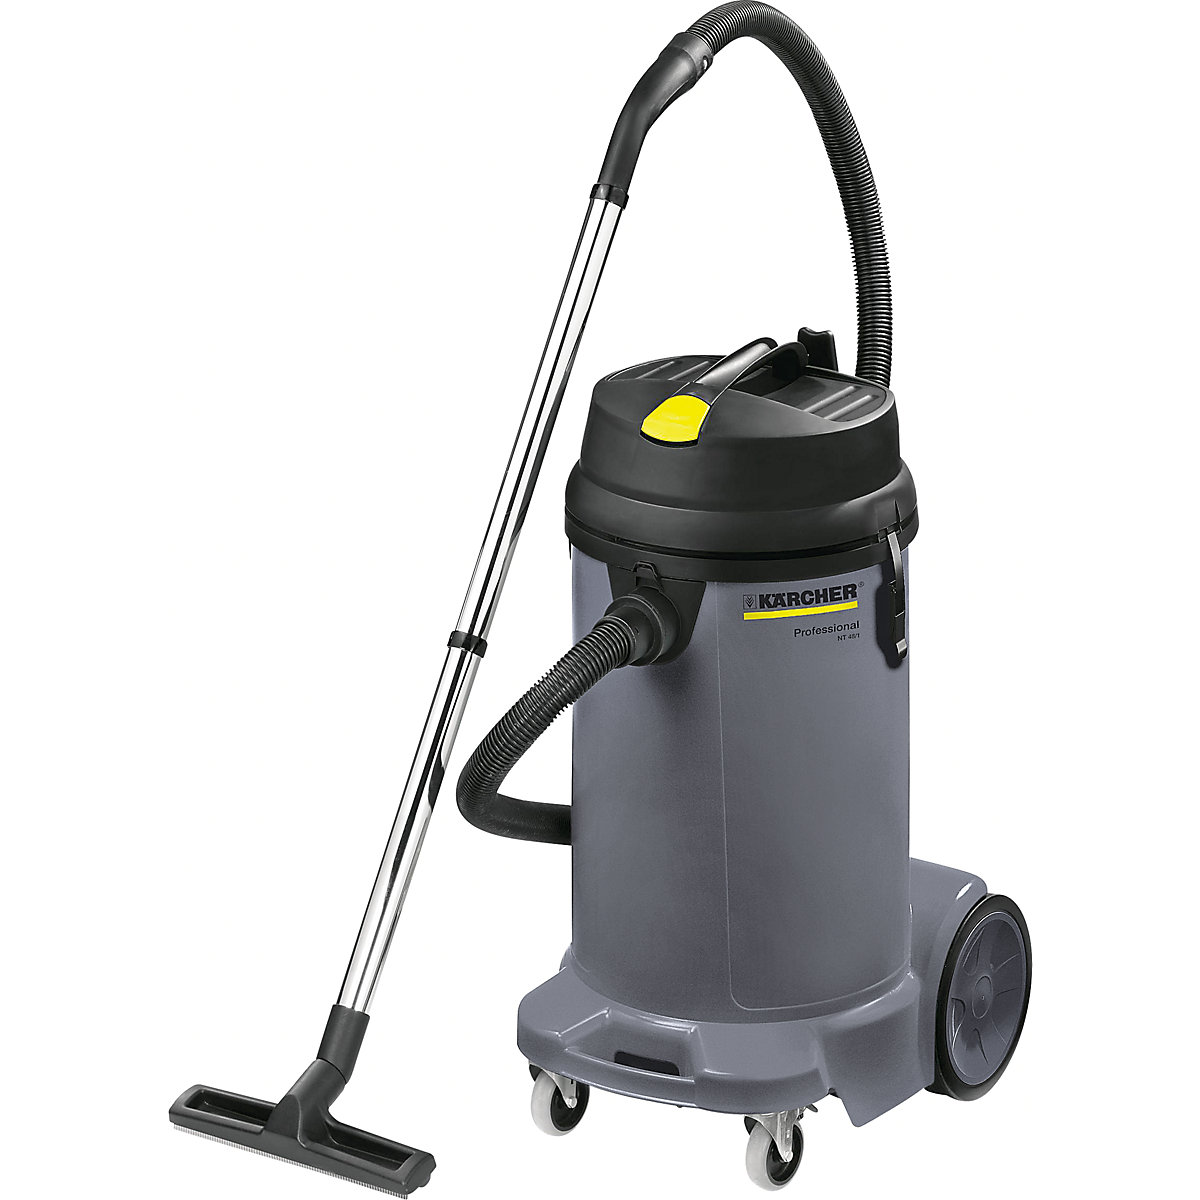 Wet and dry vacuum cleaner – Kärcher